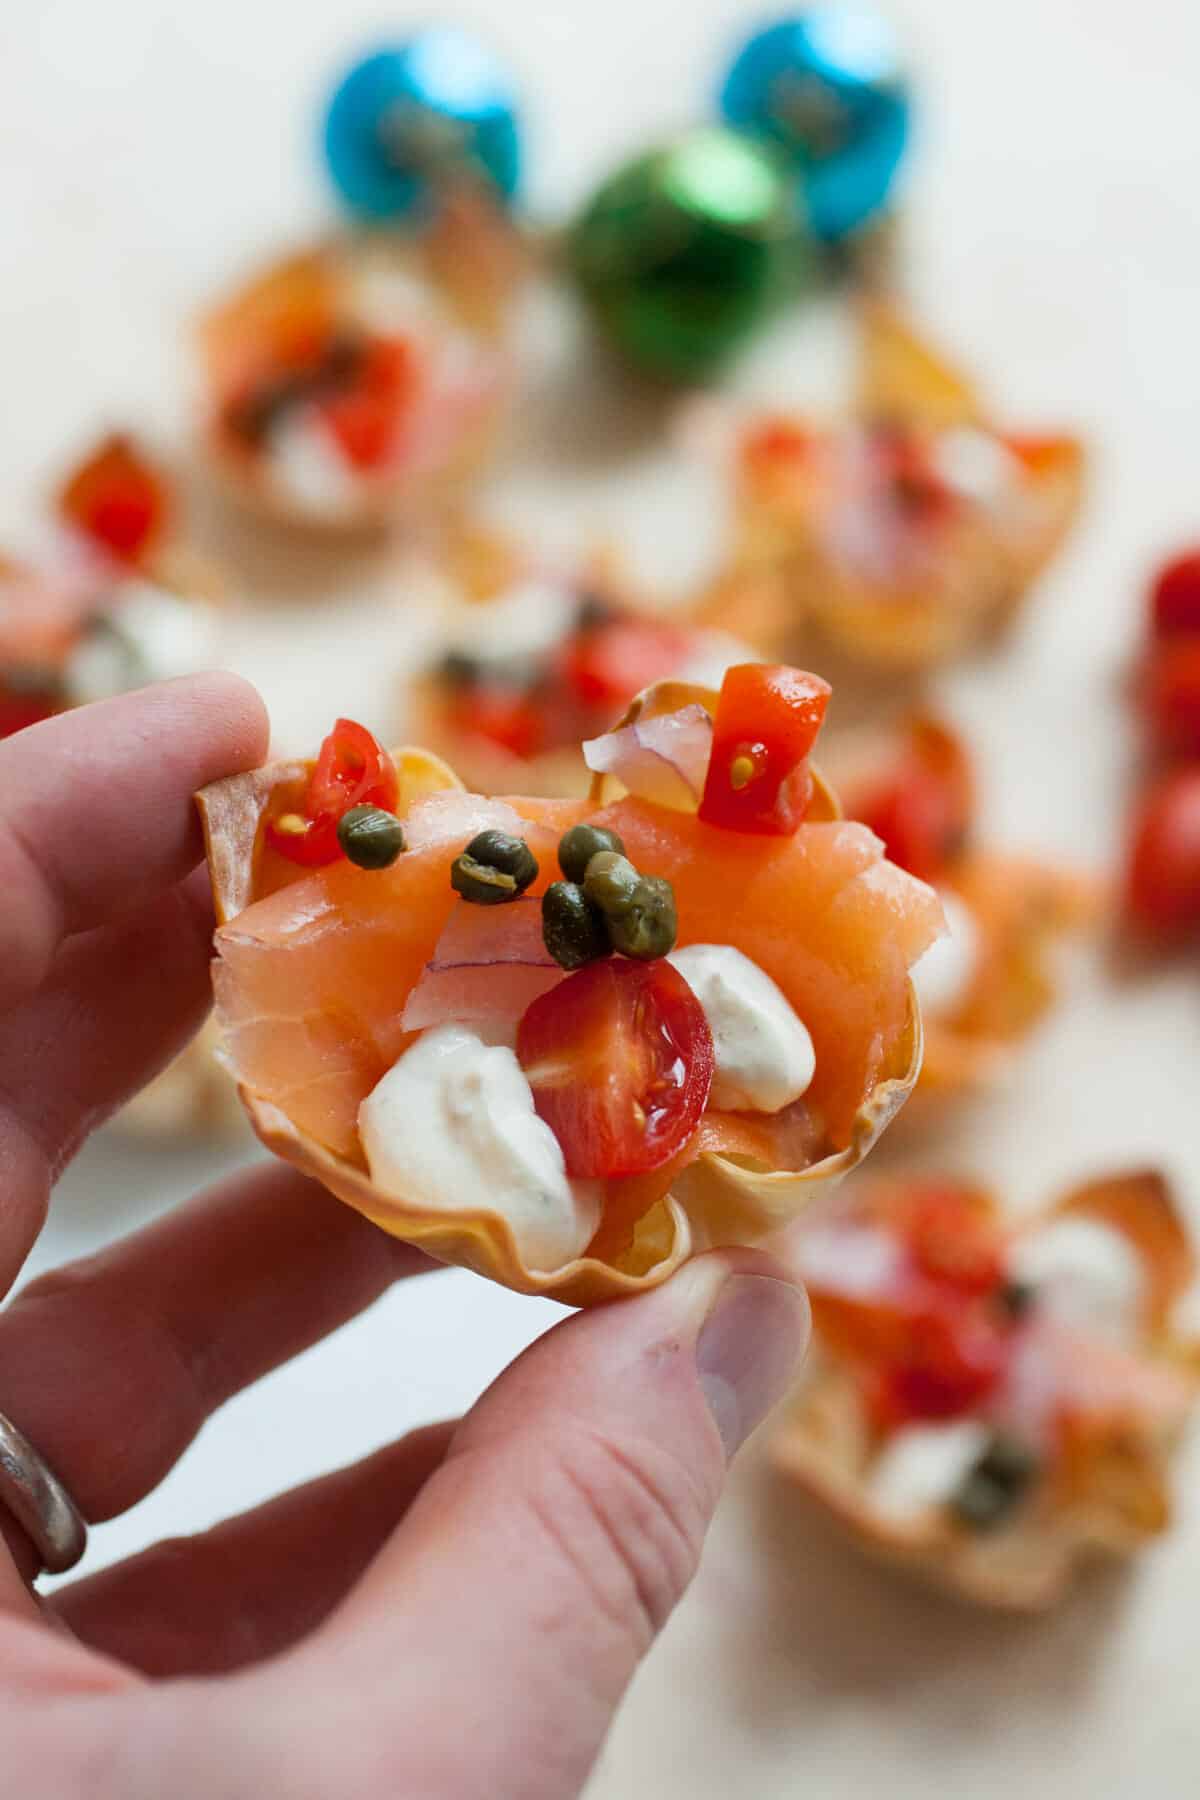 Lox Wonton Cups: These easy wonton cups are the perfect appetizer for a party. Easy to make and really classy. Plus, very delicious! | macheesmo.com